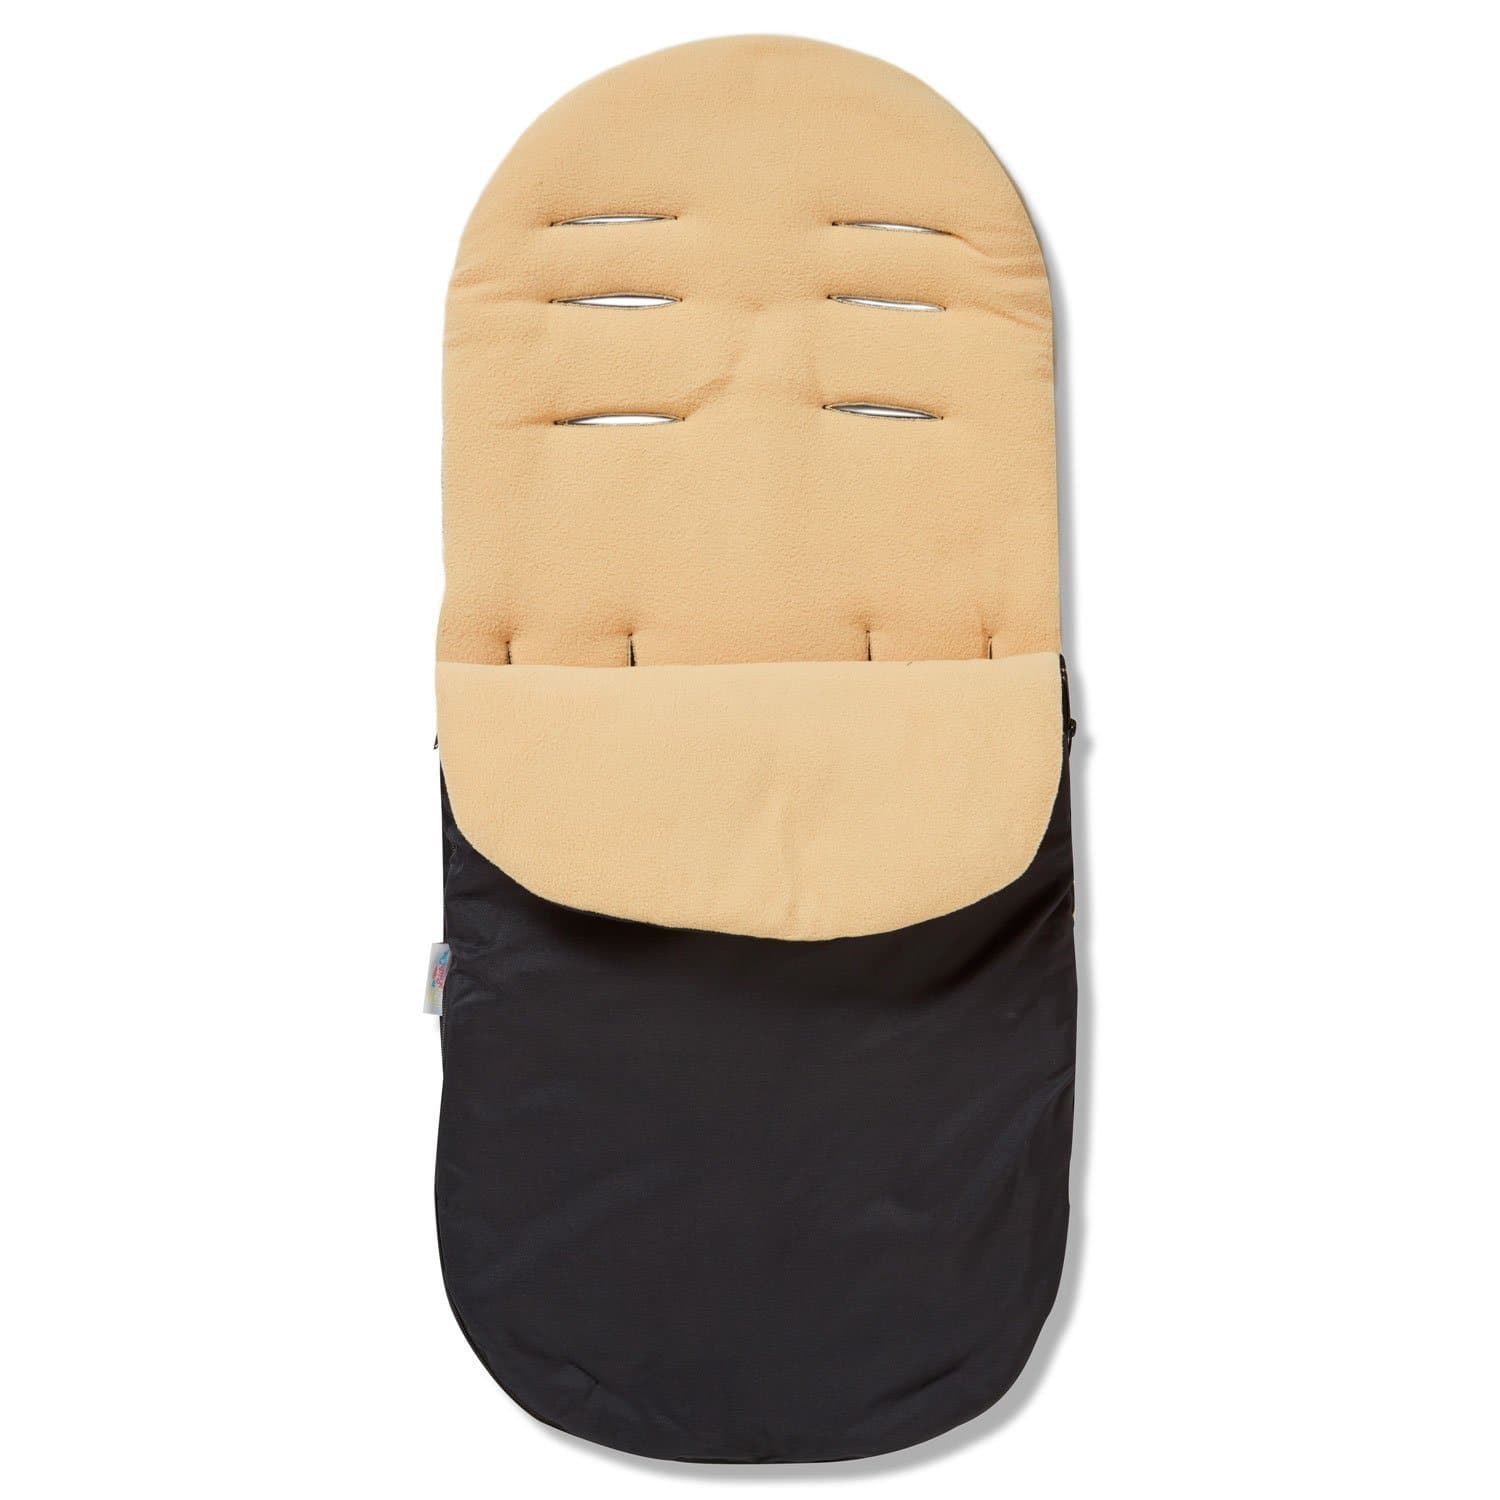 Footmuff / Cosy Toes Compatible with Peg Perego - Sand / Fits All Models | For Your Little One